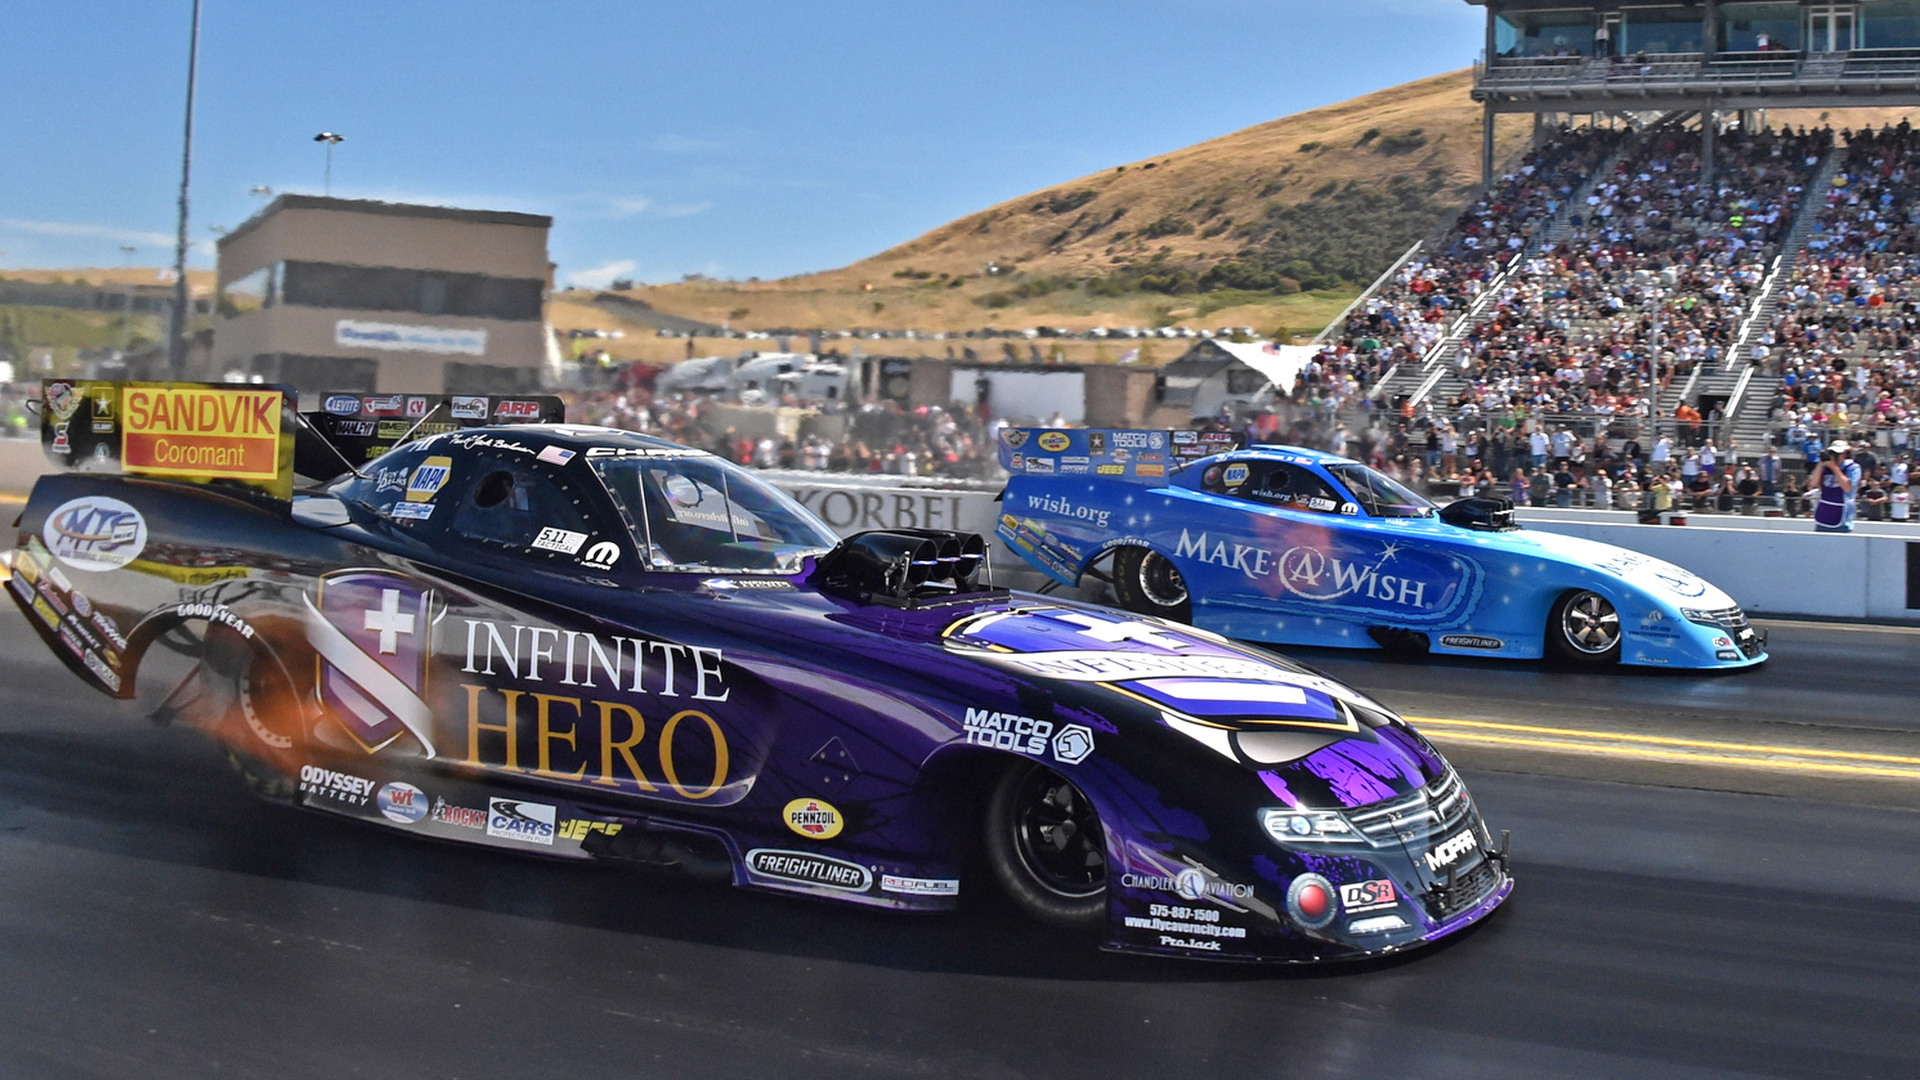 Jack Beckman and the Infinite Hero Dodge Charger at the 2015 NHRA Sonoma Nationals